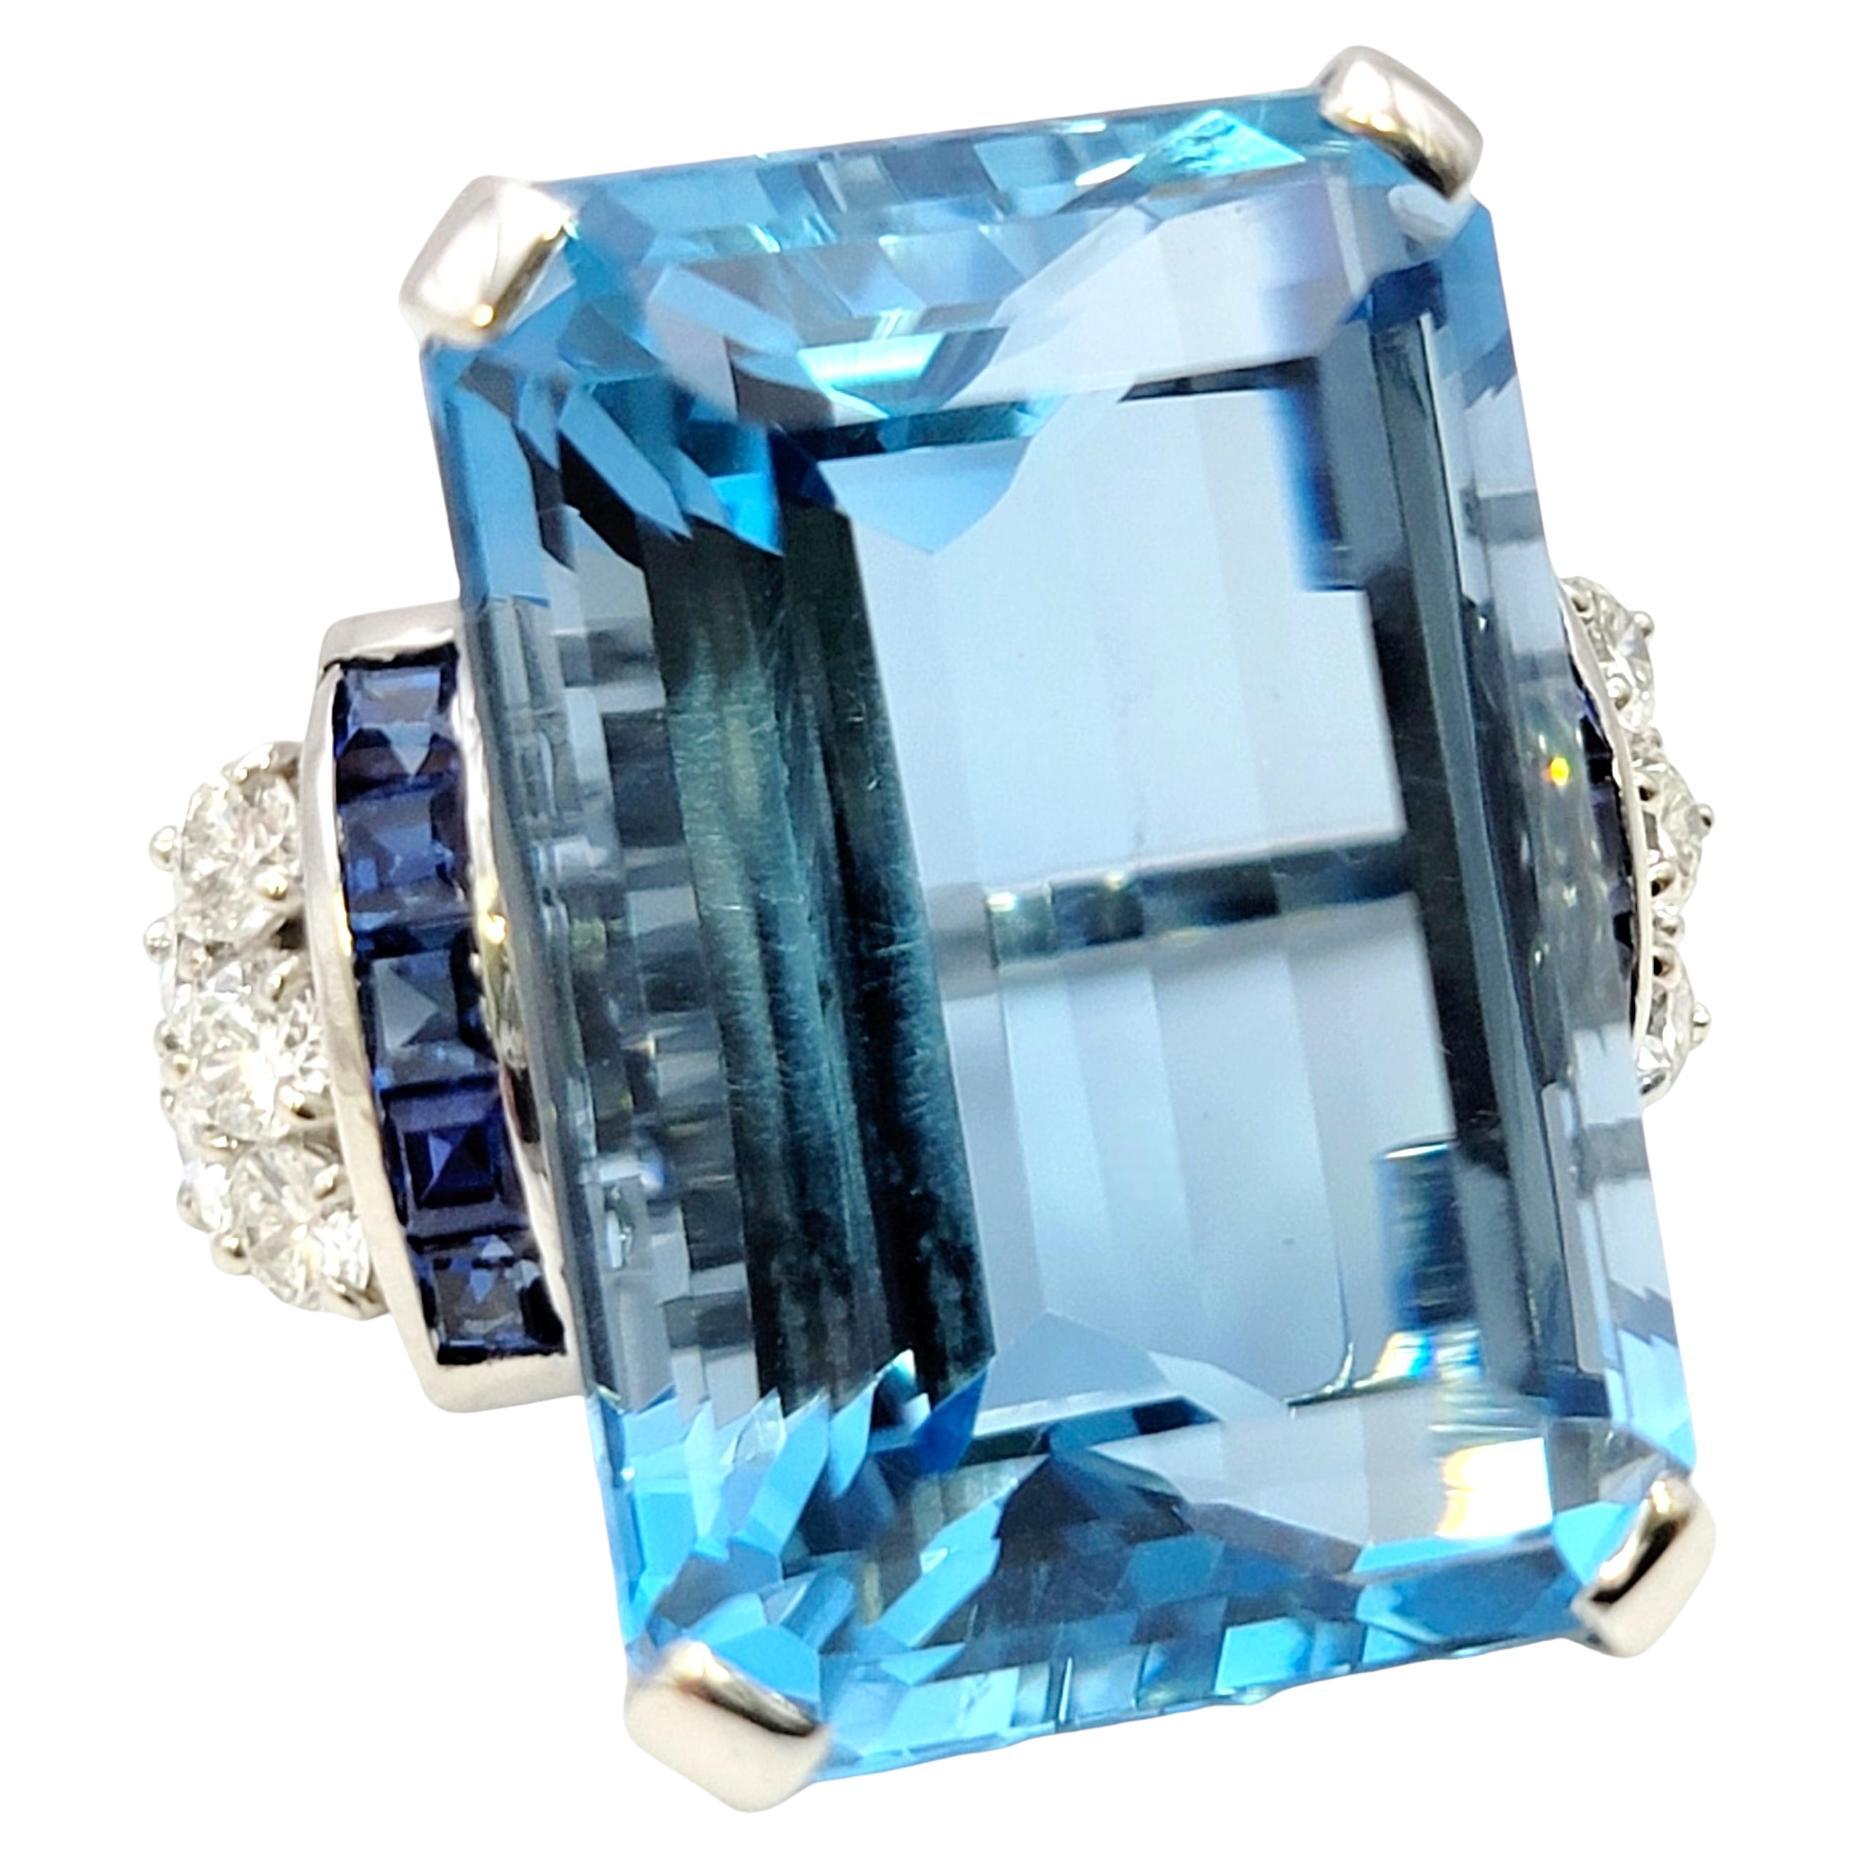 Minorca Ring – High Jewelry ring in white gold 18k with aquamarine and  sapphire – Mellerio